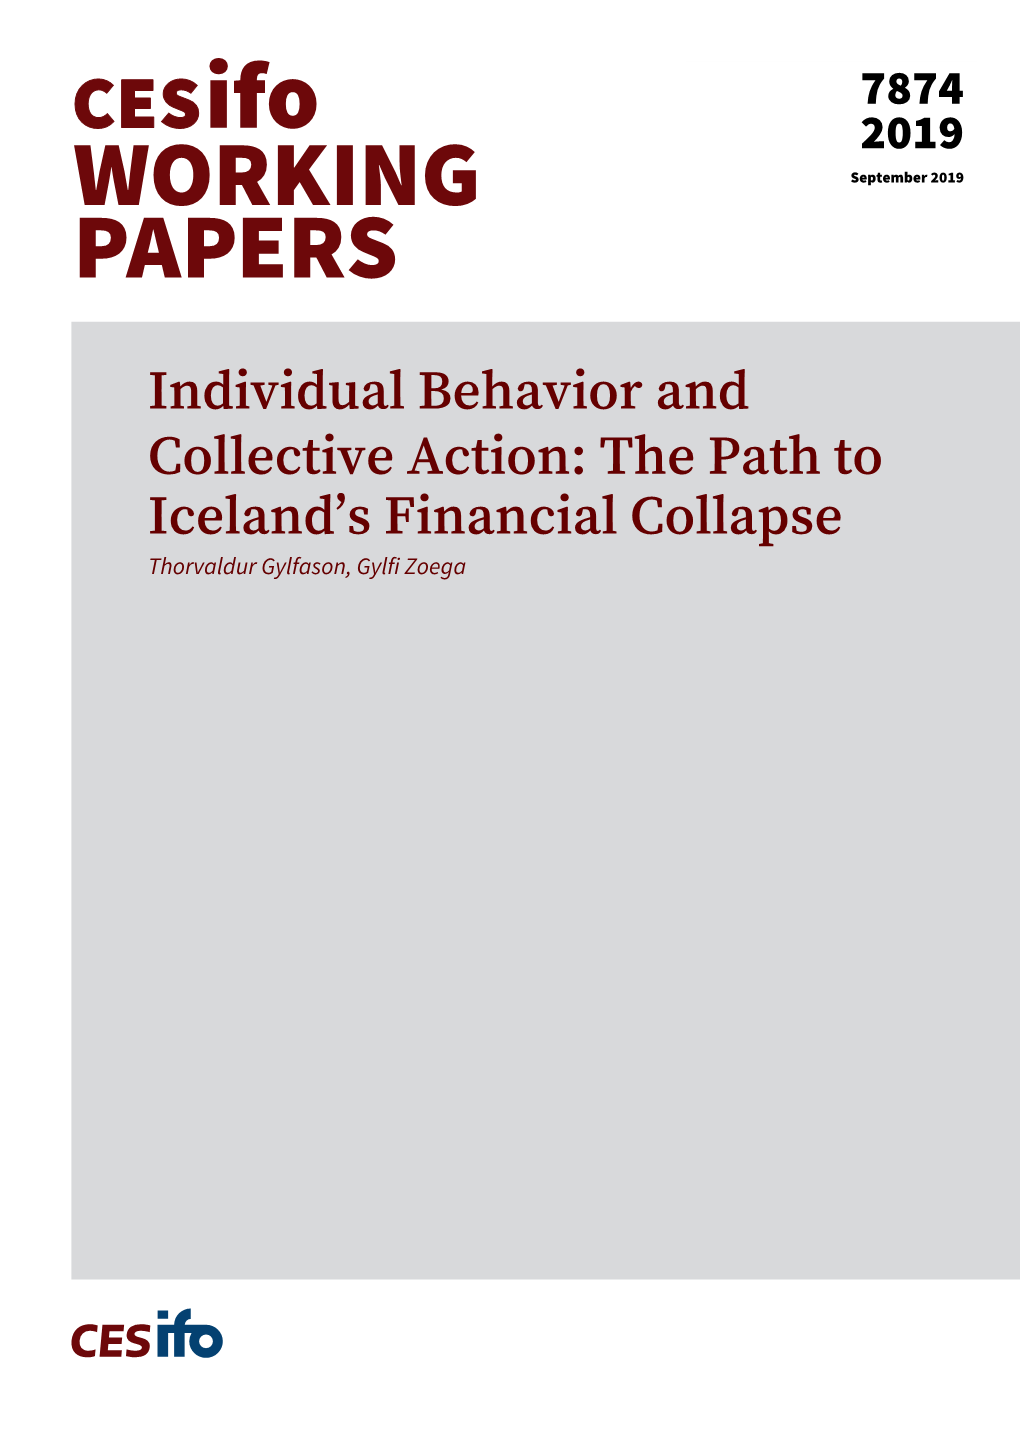 Individual Behavior and Collective Action: the Path to Iceland's Financial Collapse